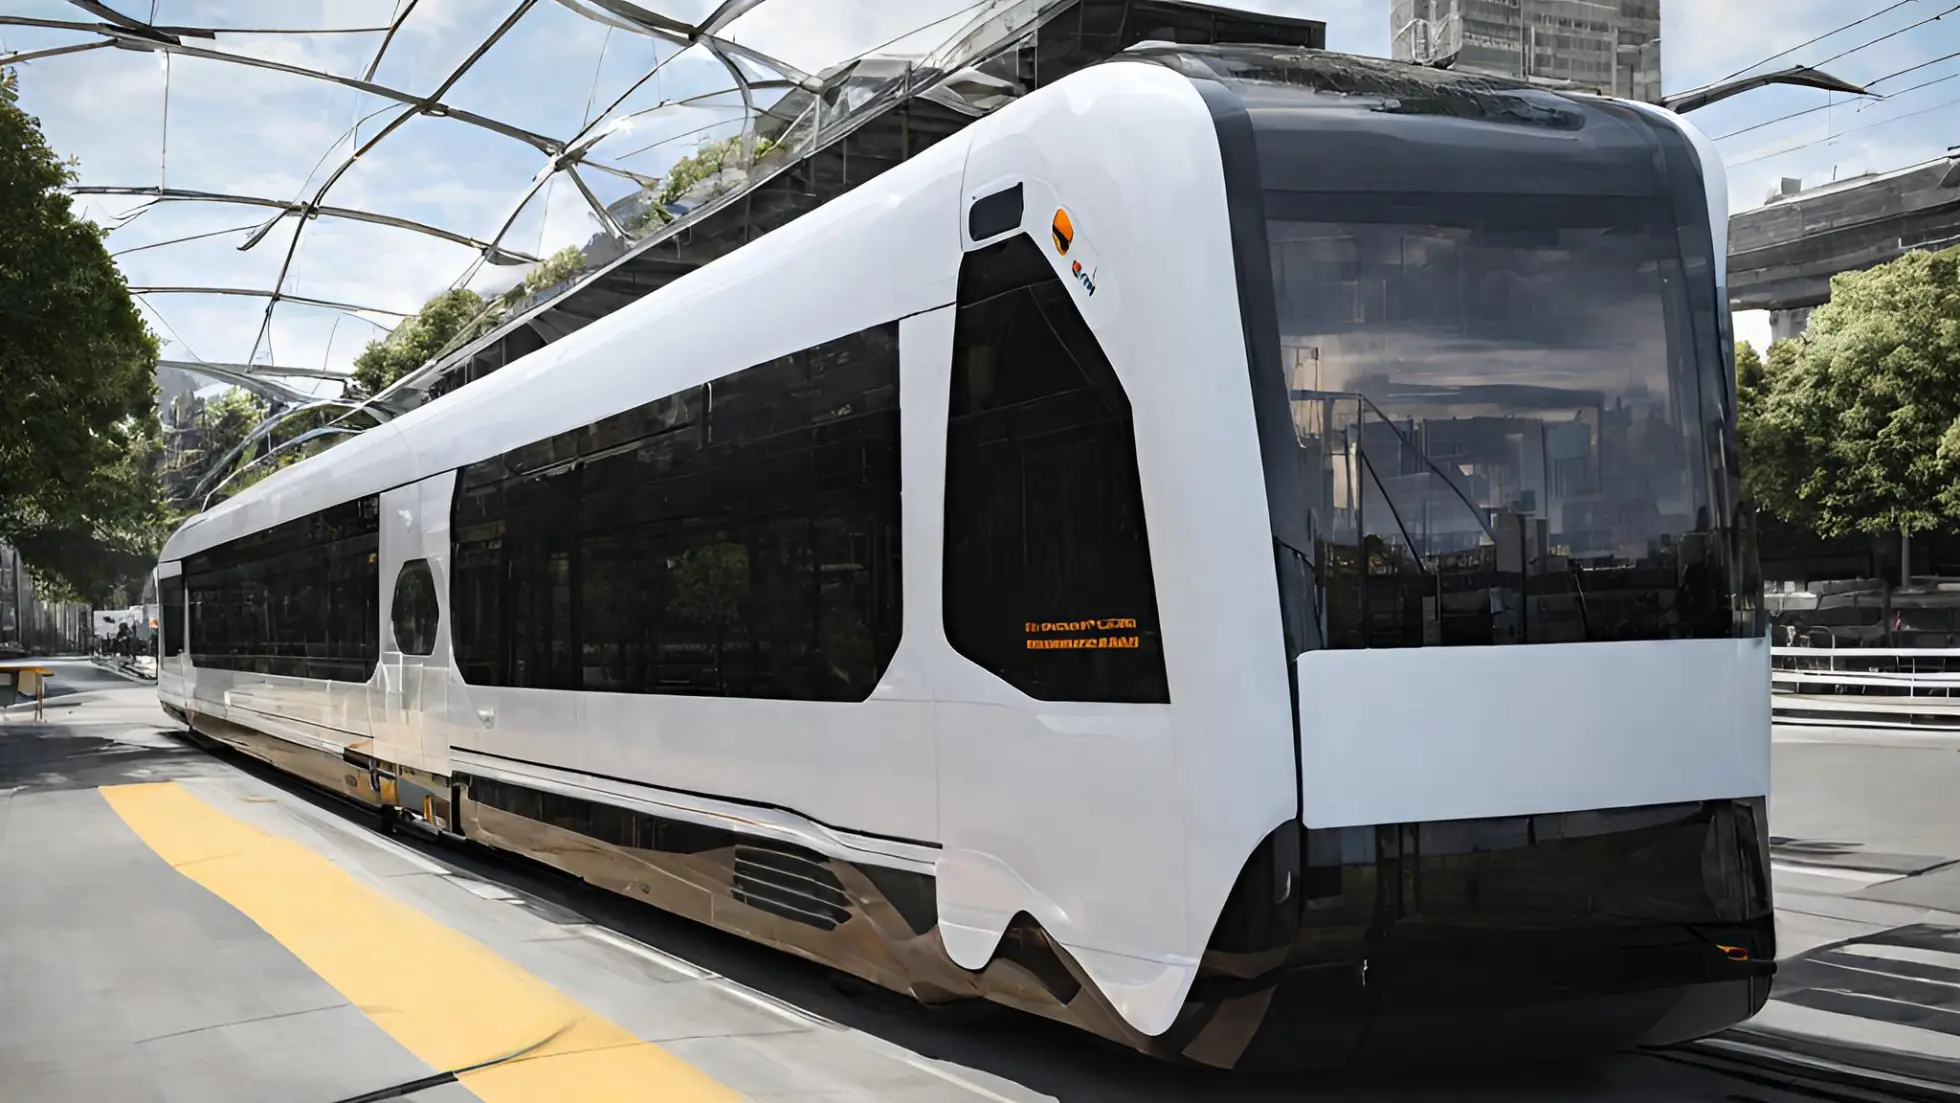 Dubai to unveil solar buses and high-speed pods for futuristic transport - Smart Zones® UAE